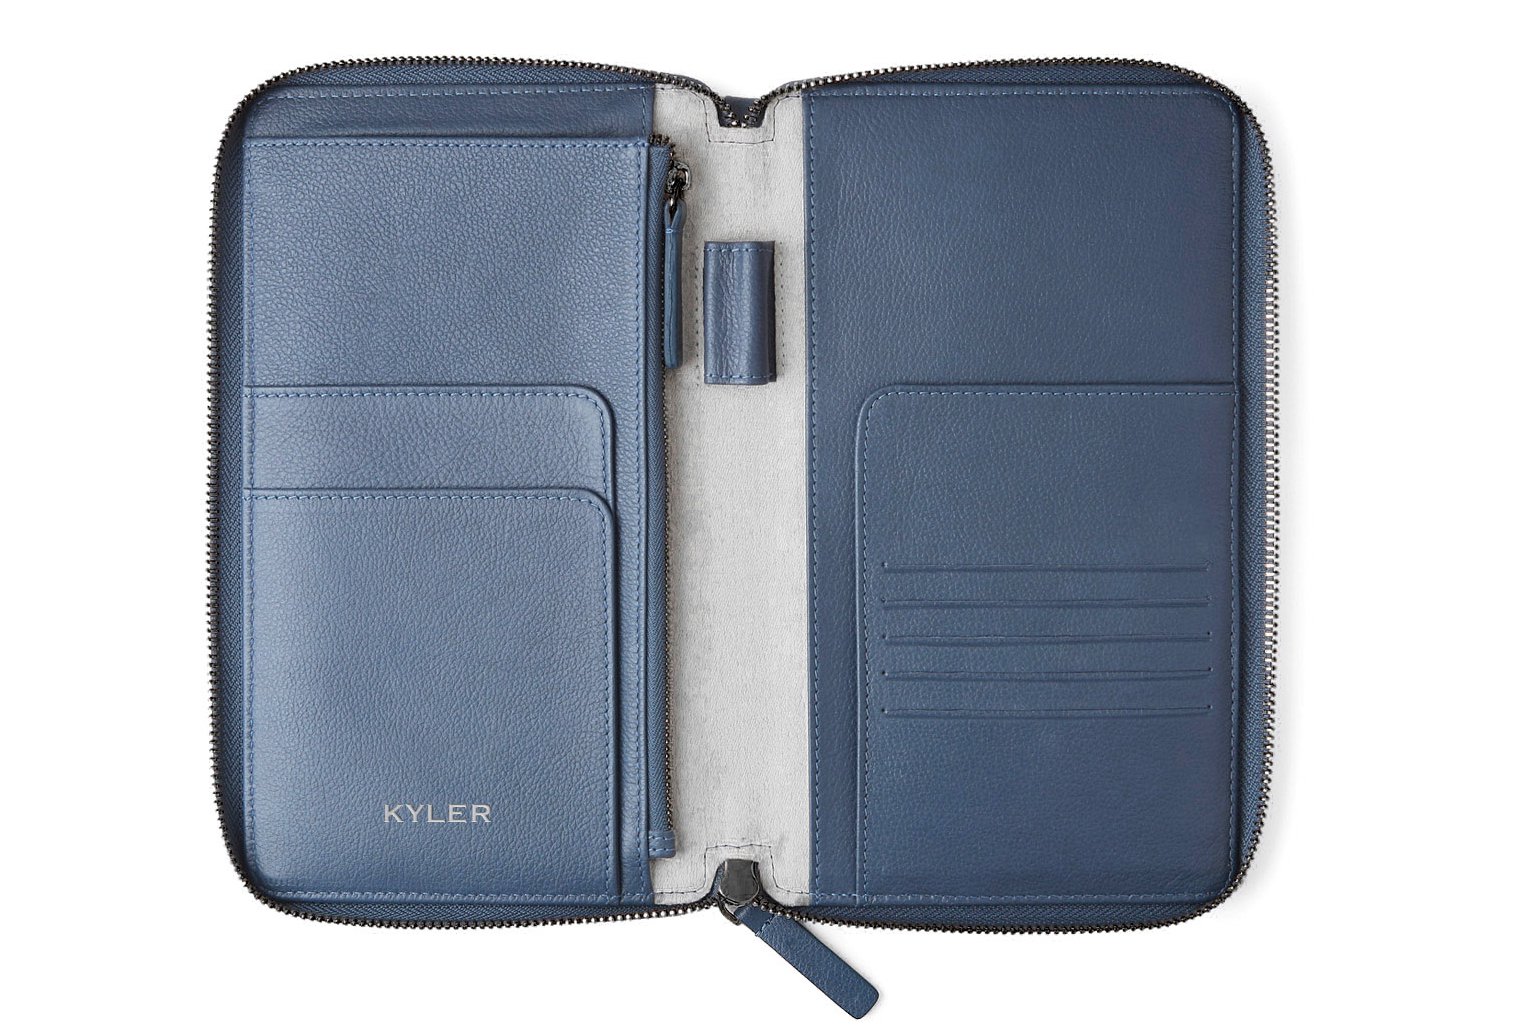 leather travel wallet with multiple compartments for passport and travel documents